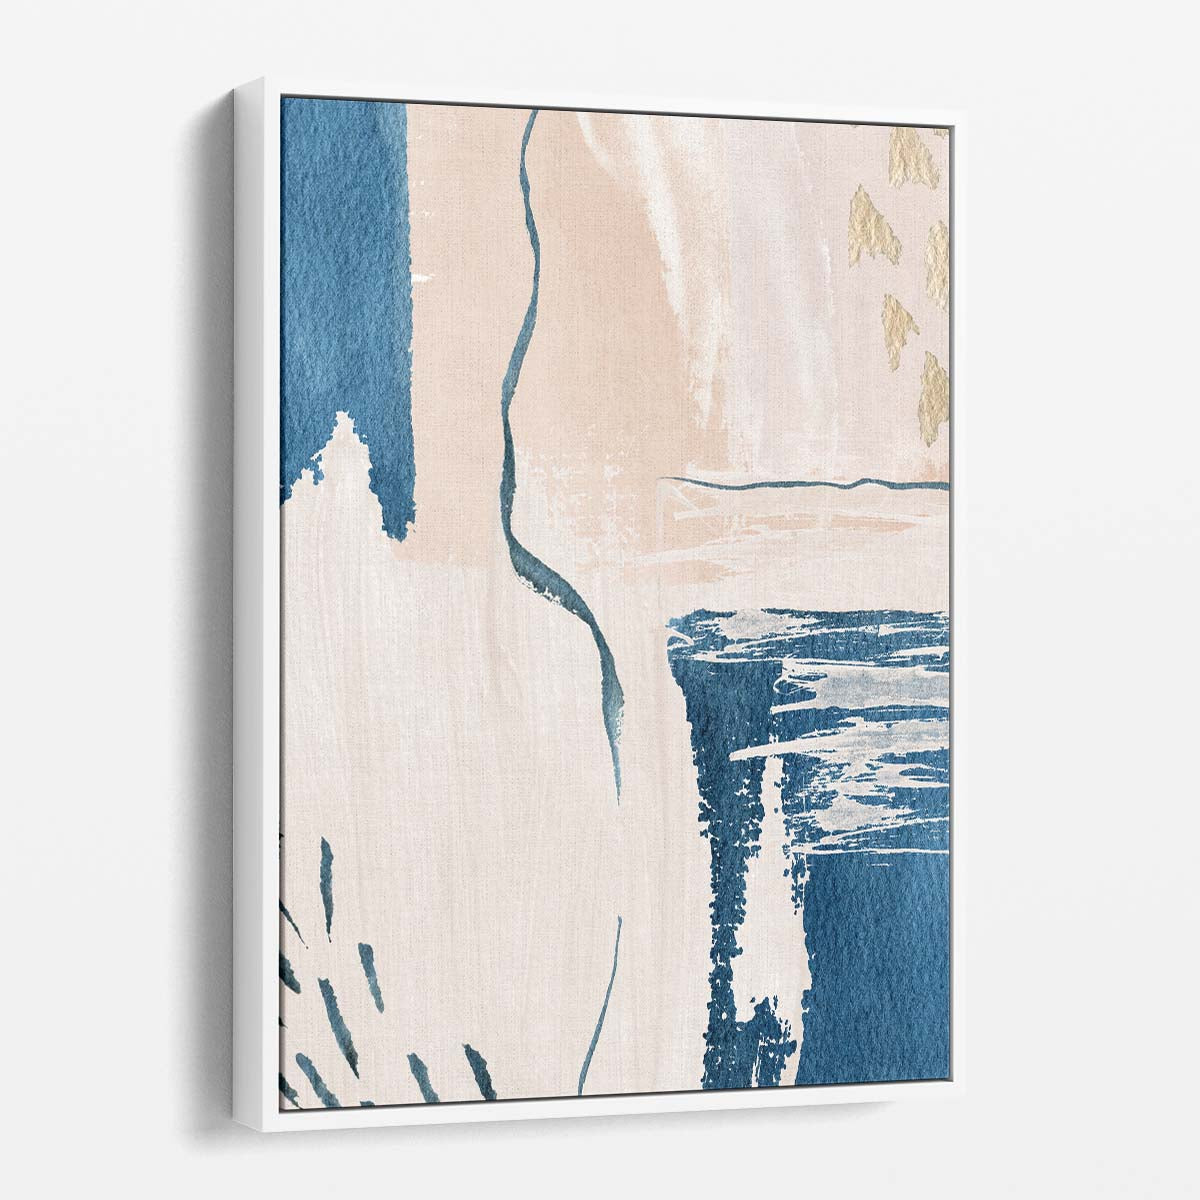 Modern Minimalist Blue & Beige Abstract Acrylic Wall Art Illustration by Luxuriance Designs, made in USA